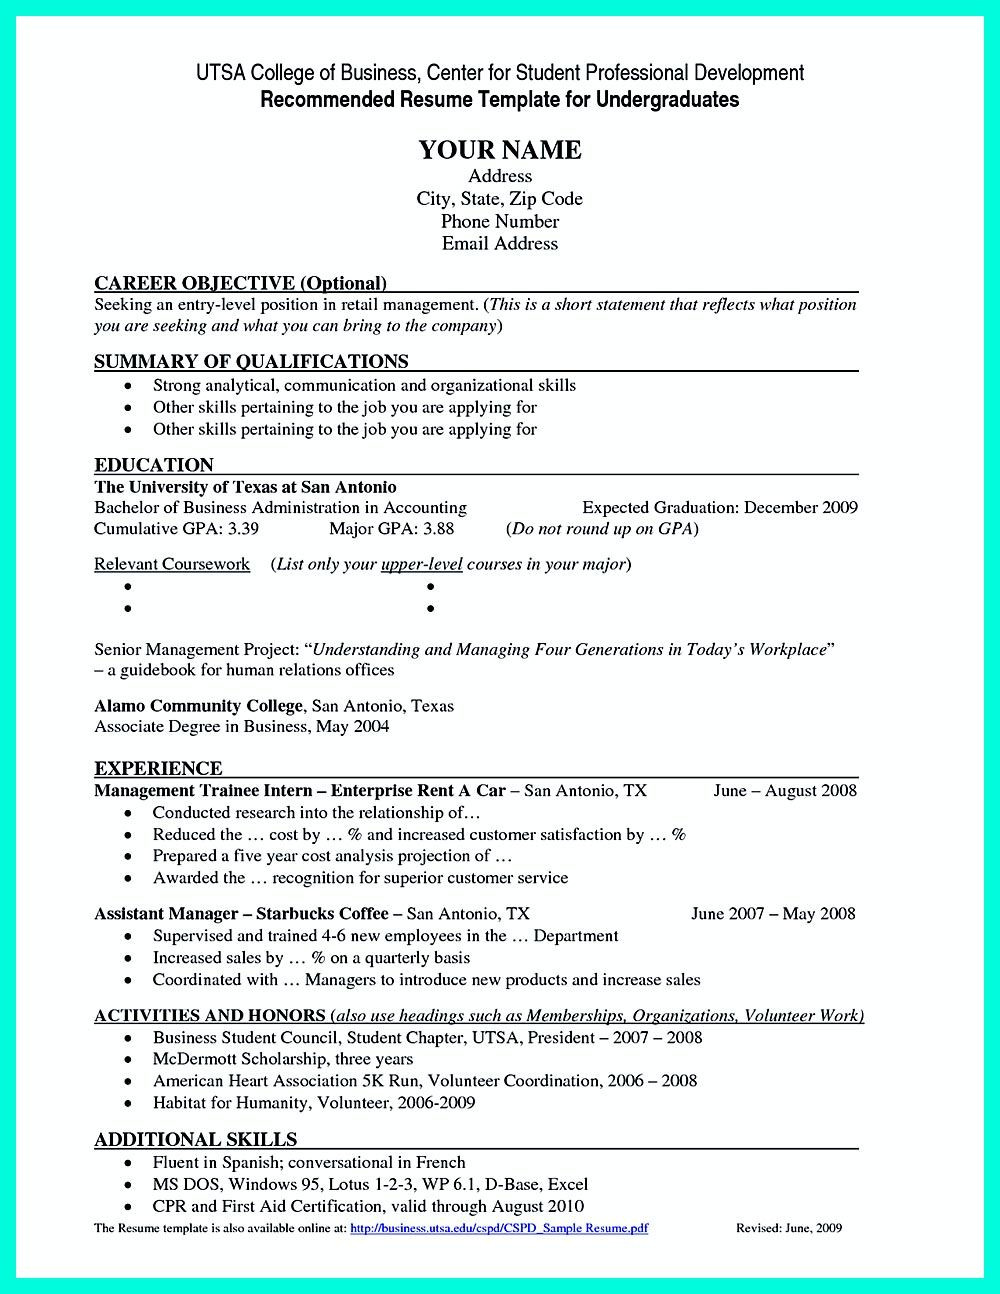 Internship Resume Sample for College Students Pdf Best Current College Student Resume with No Experience Job …